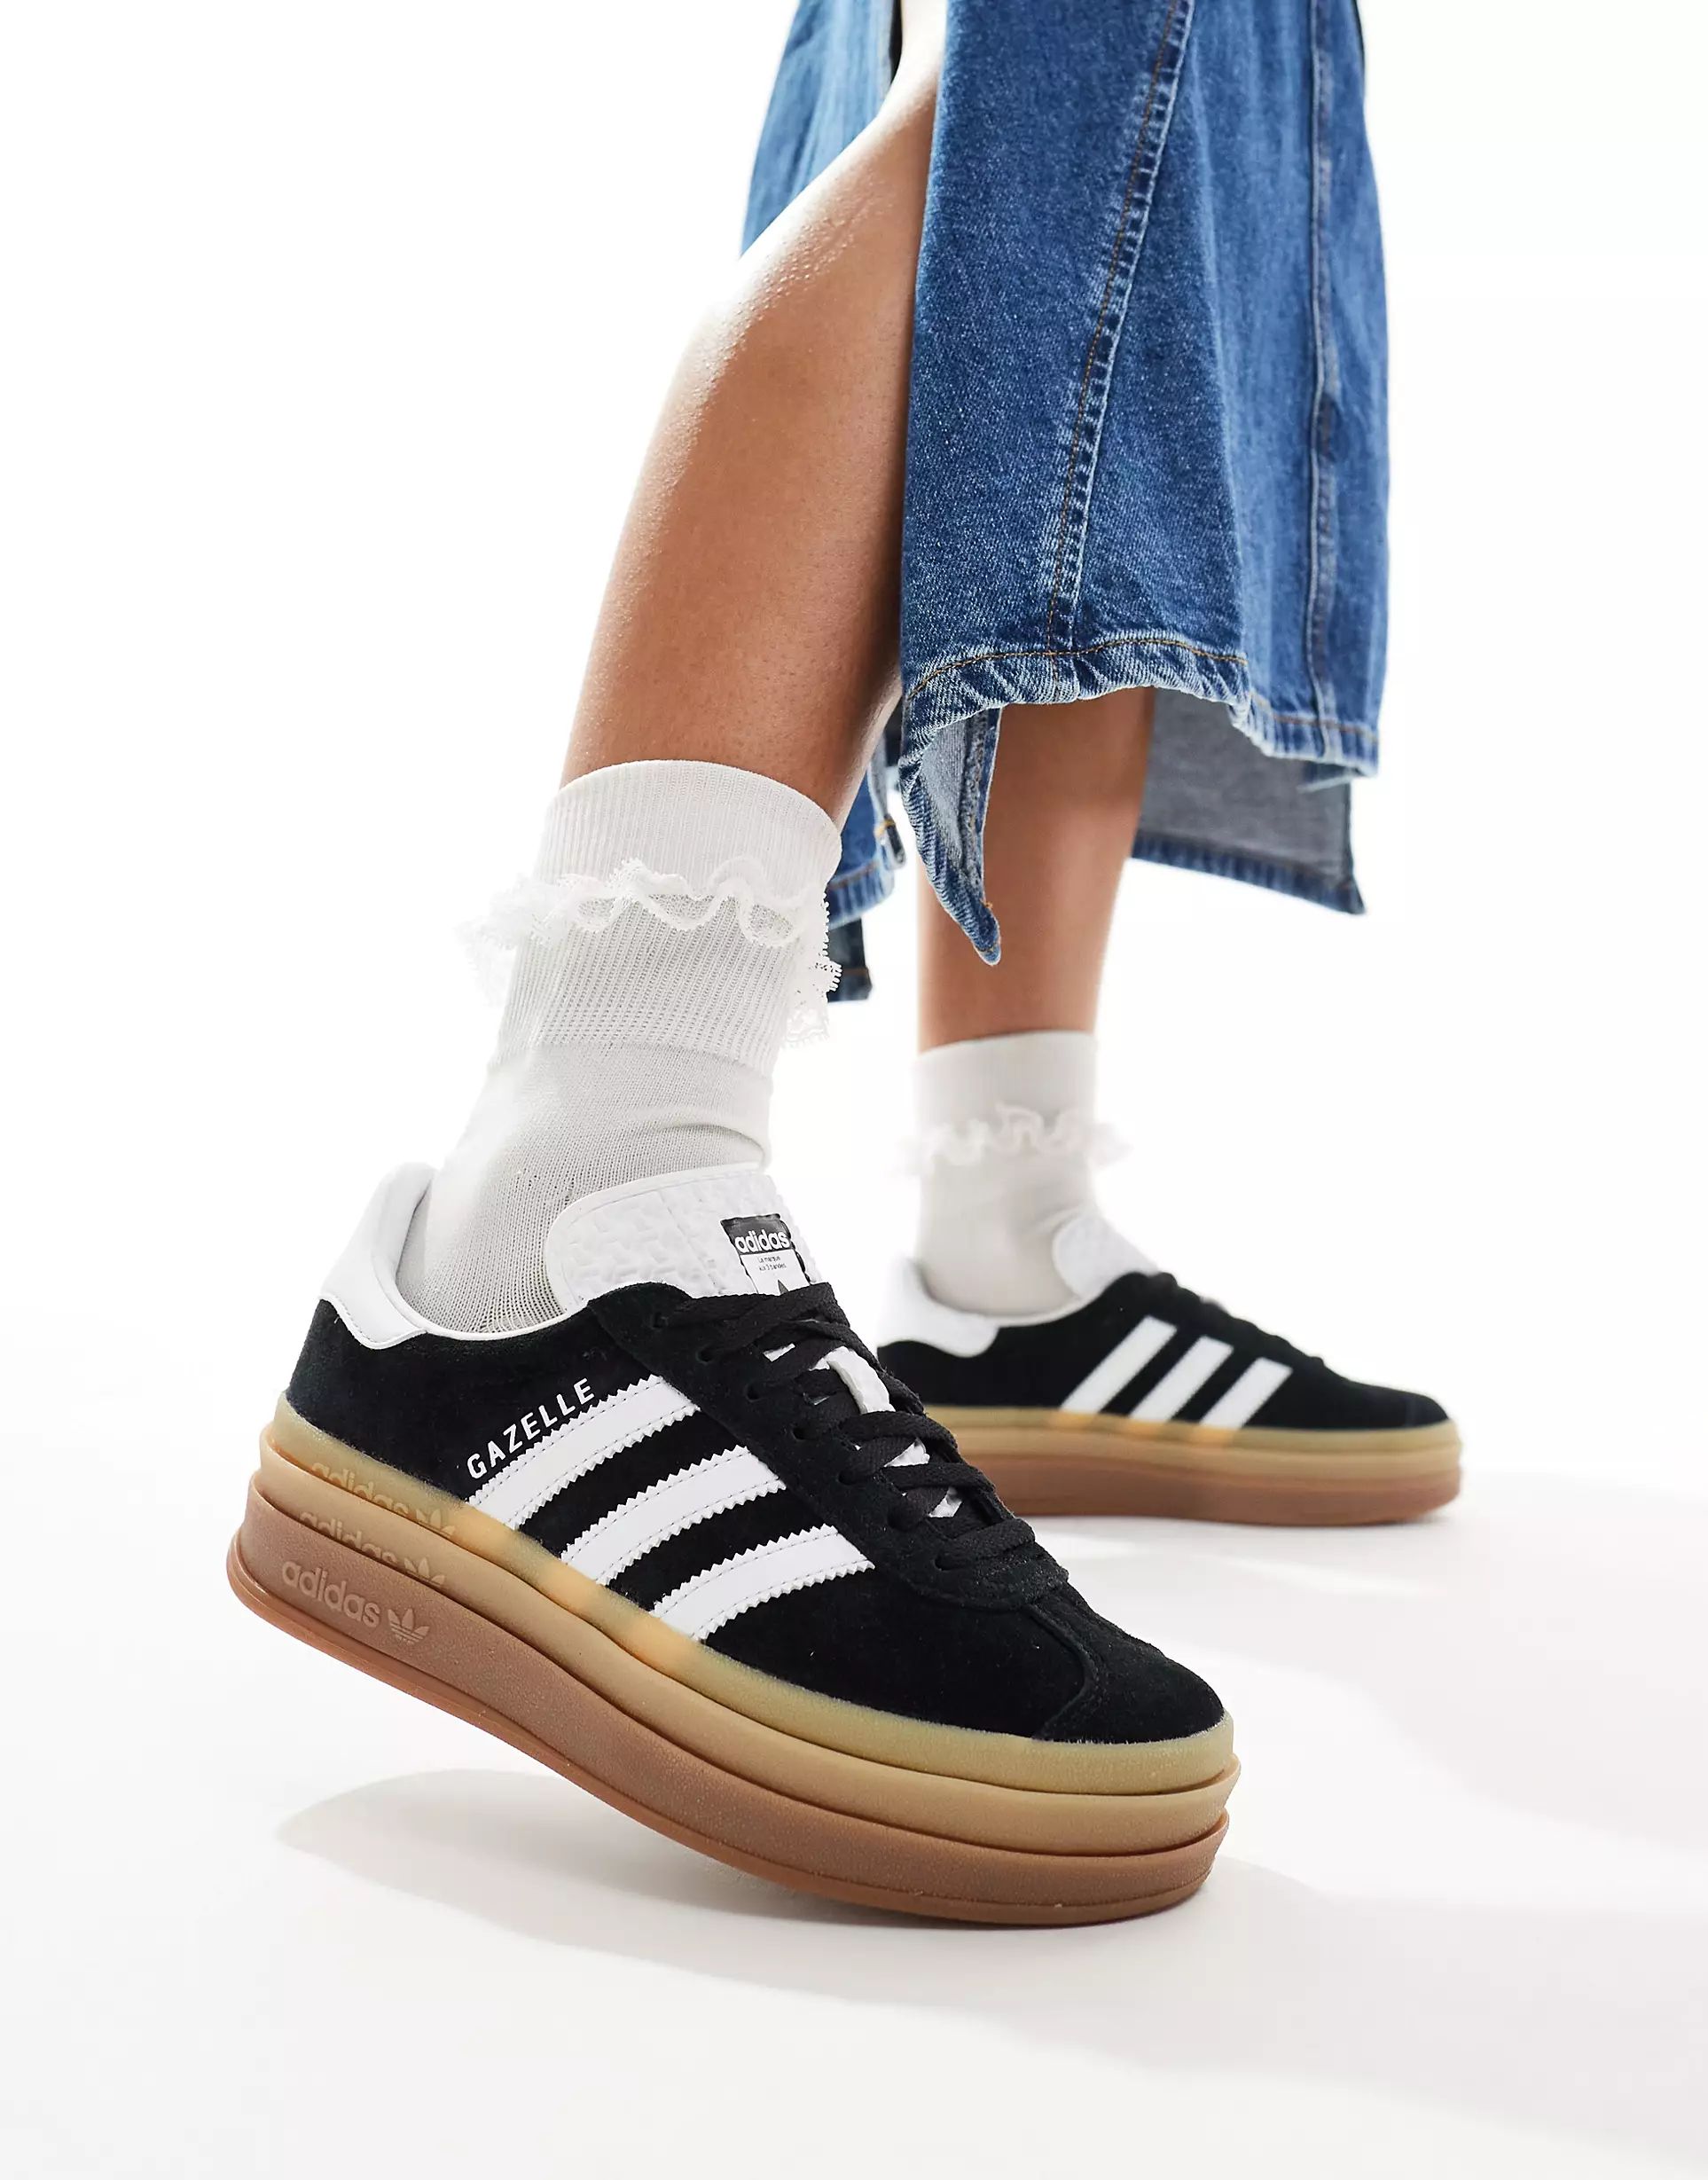 adidas Originals Gazelle Bold trainers in black and white | ASOS (Global)